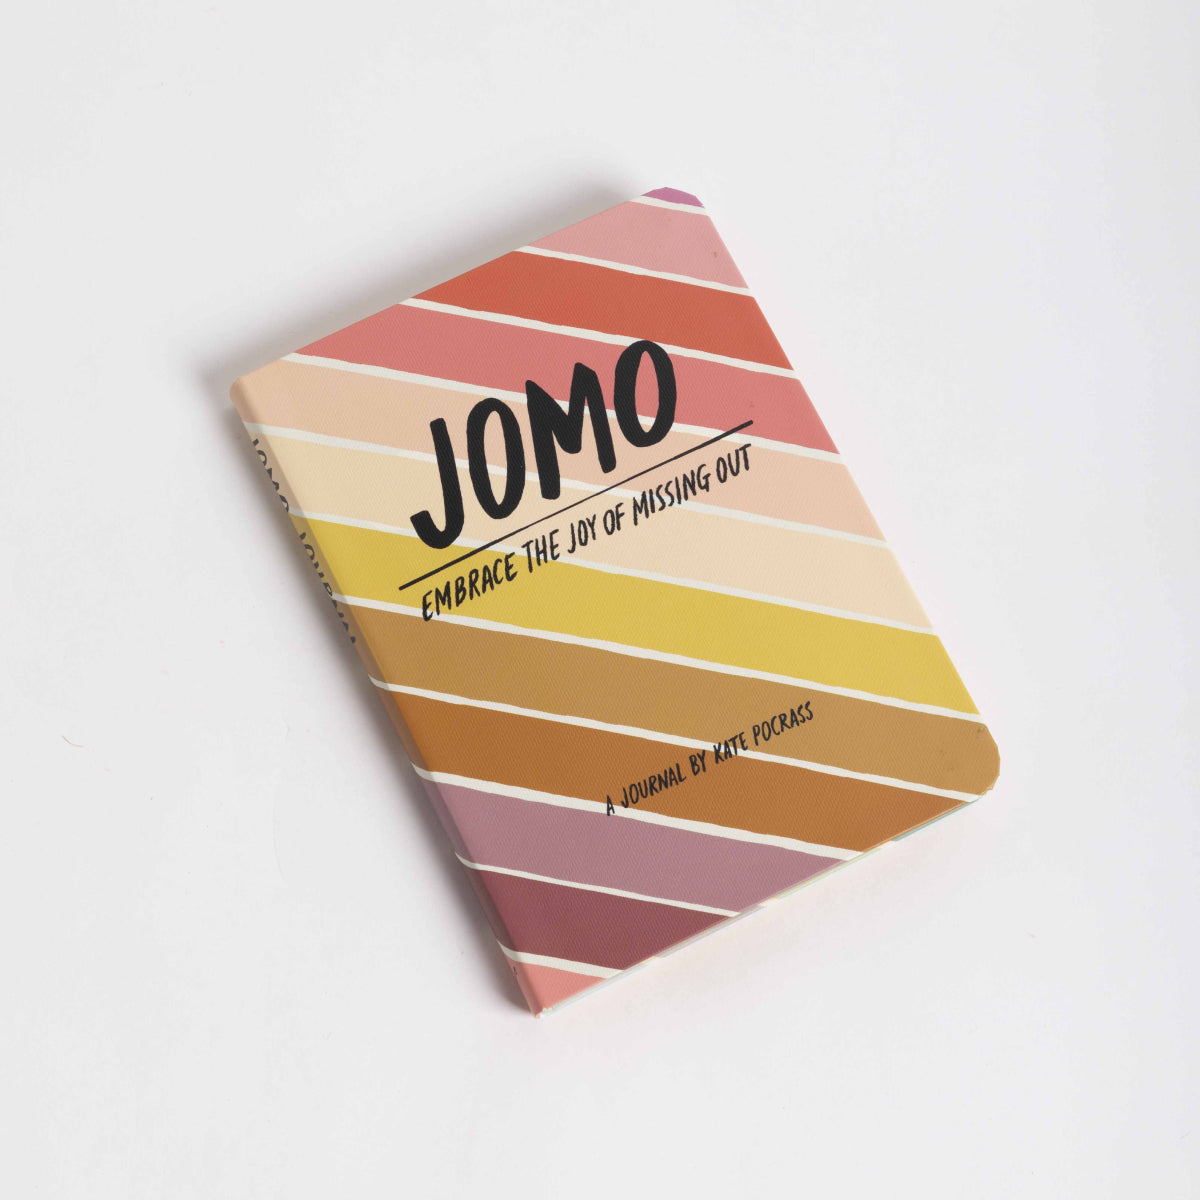 JOMO- Embrace The Joy Of Missing Out Journal - P I C N I C 